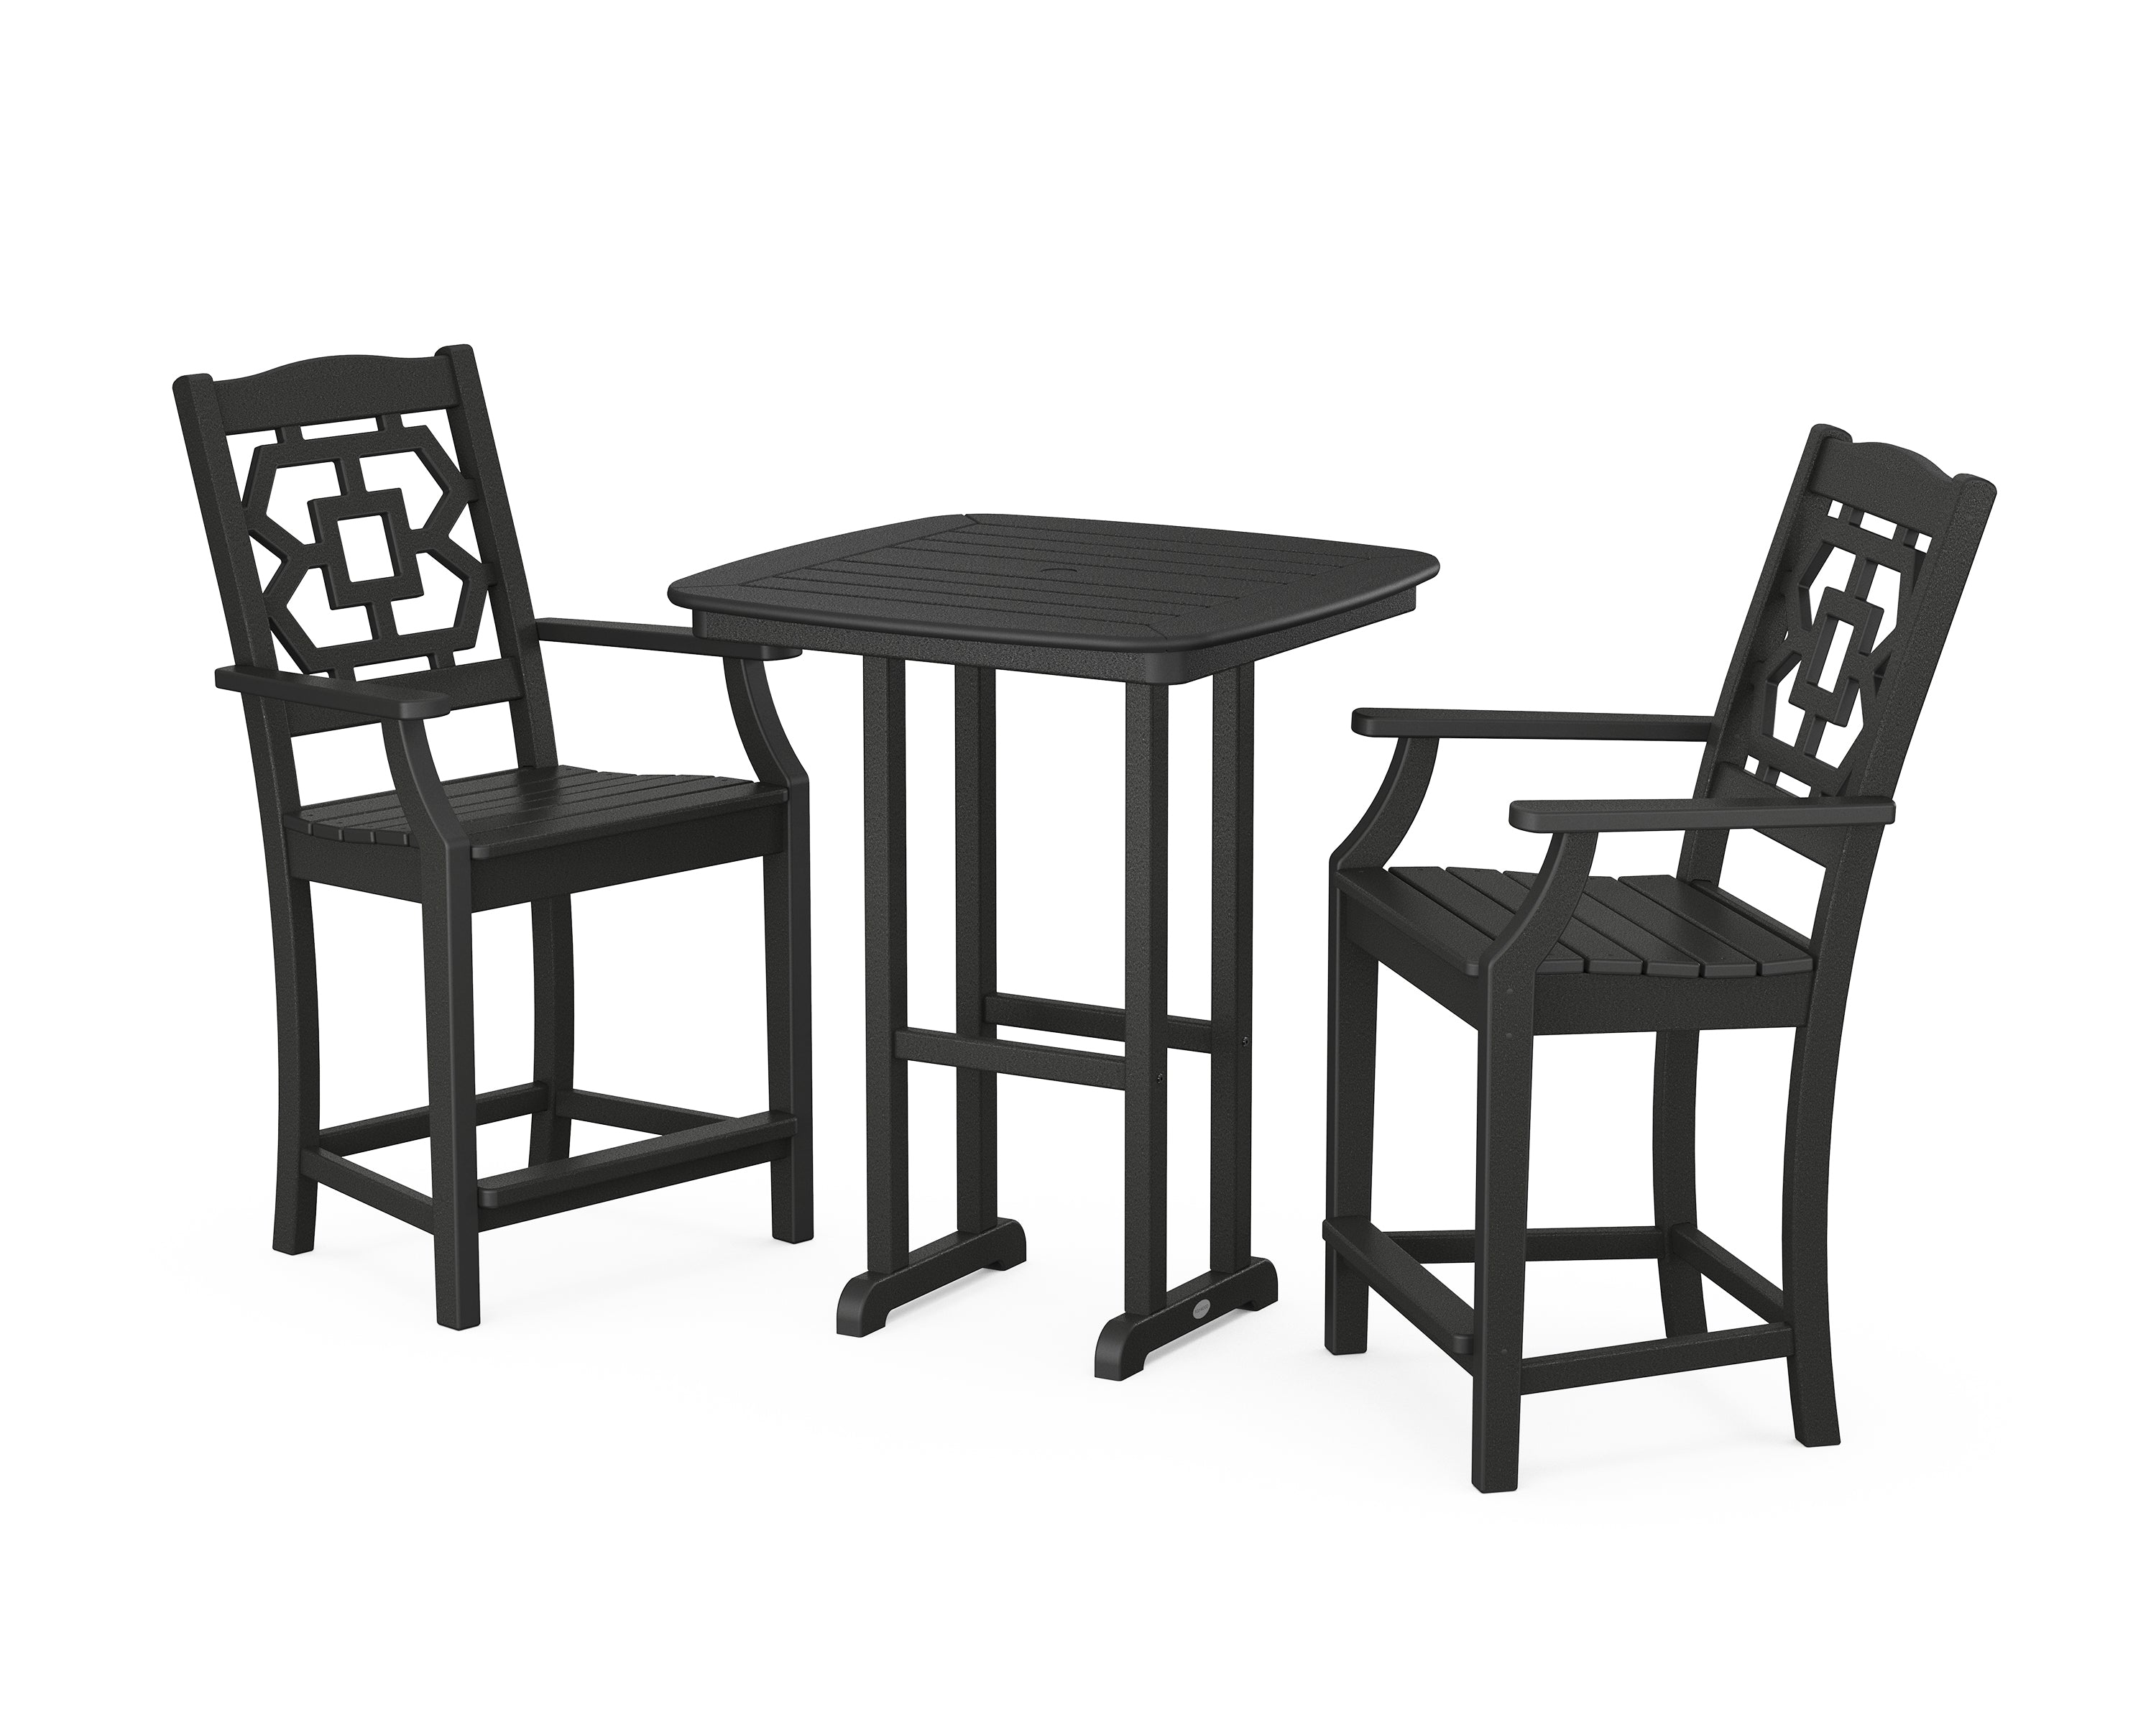 Martha Stewart by POLYWOOD® Chinoiserie 3-Piece Counter Set in Black